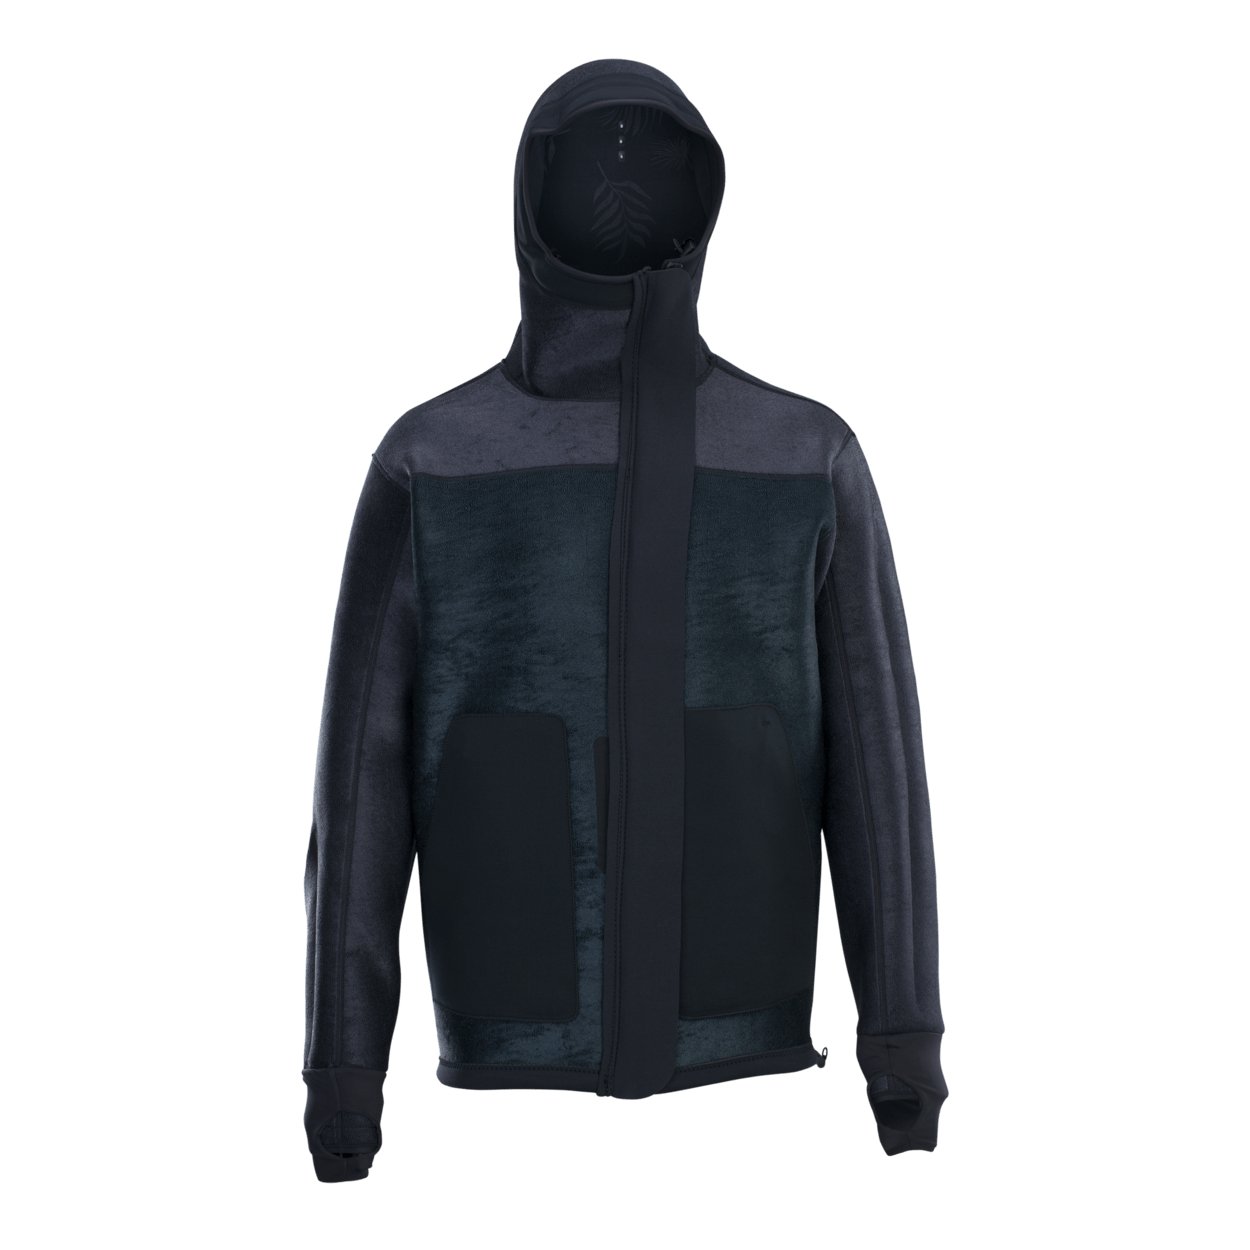 ION Neo Shelter Jacket Amp men 2023 - Worthing Watersports - 9010583118840 - Tops - ION Water